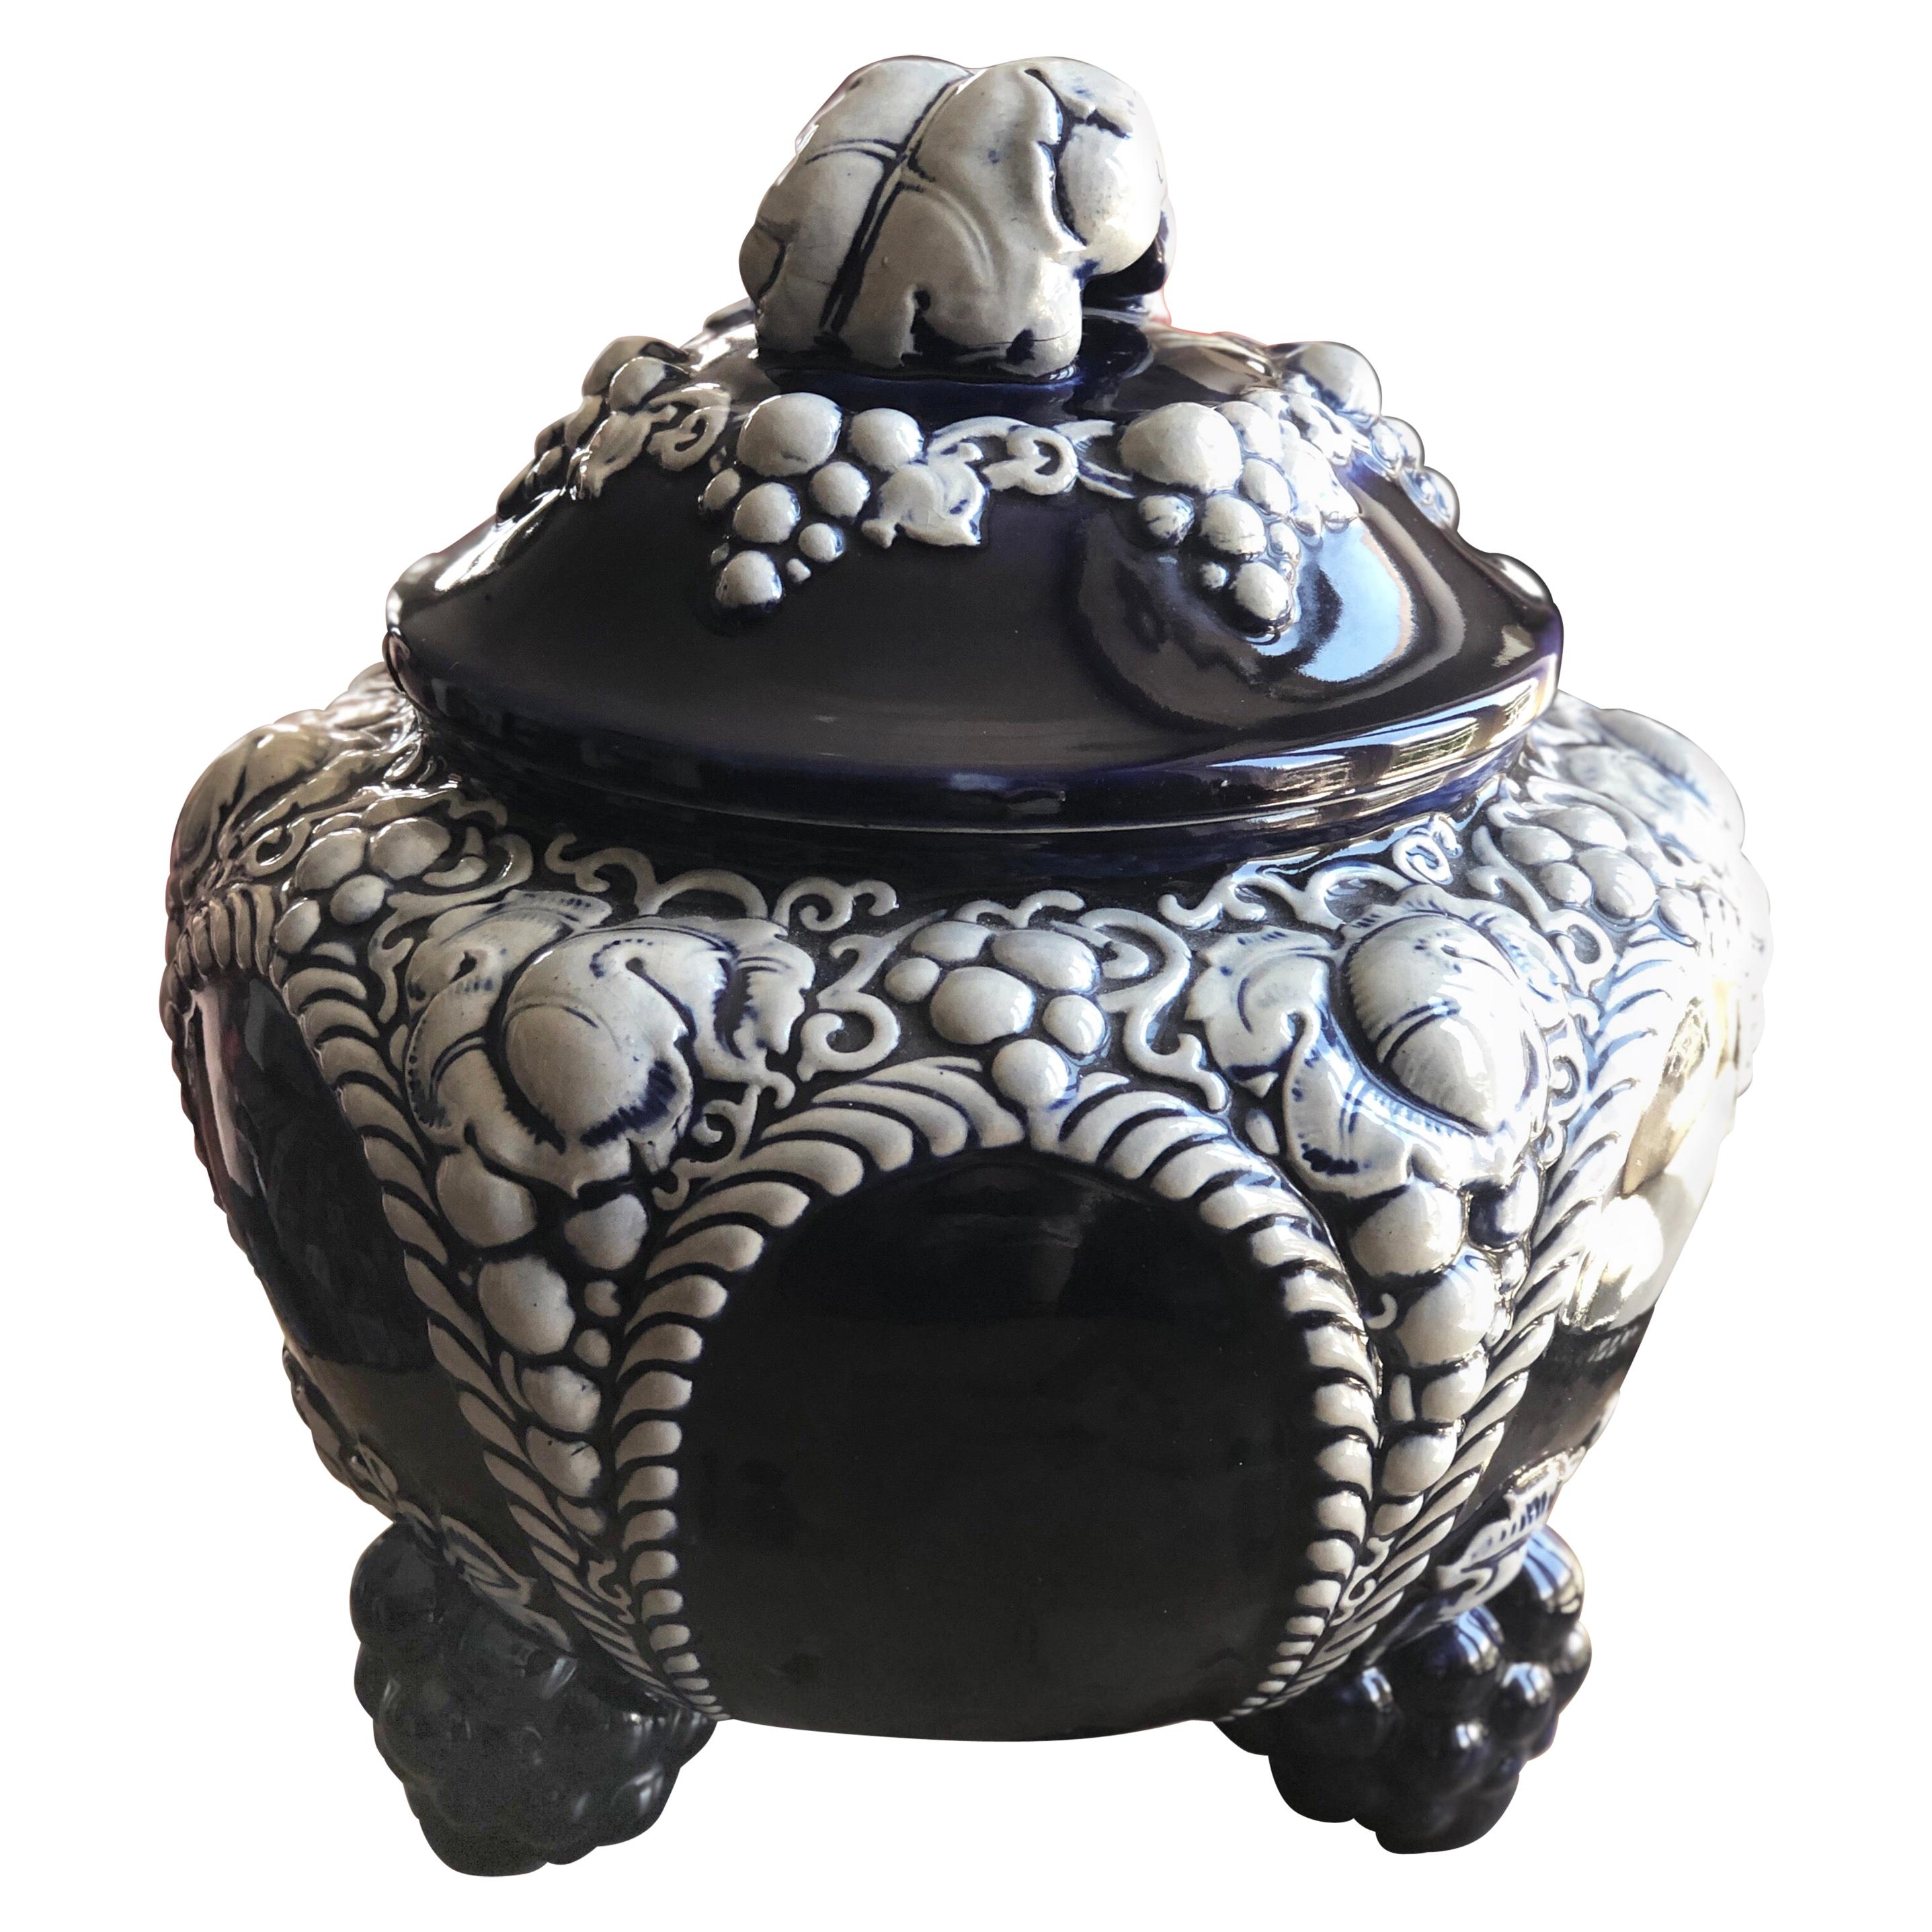 Rare French Ceramic Soup Tureen in Dark Blue Decorated with Grapes and Leafs